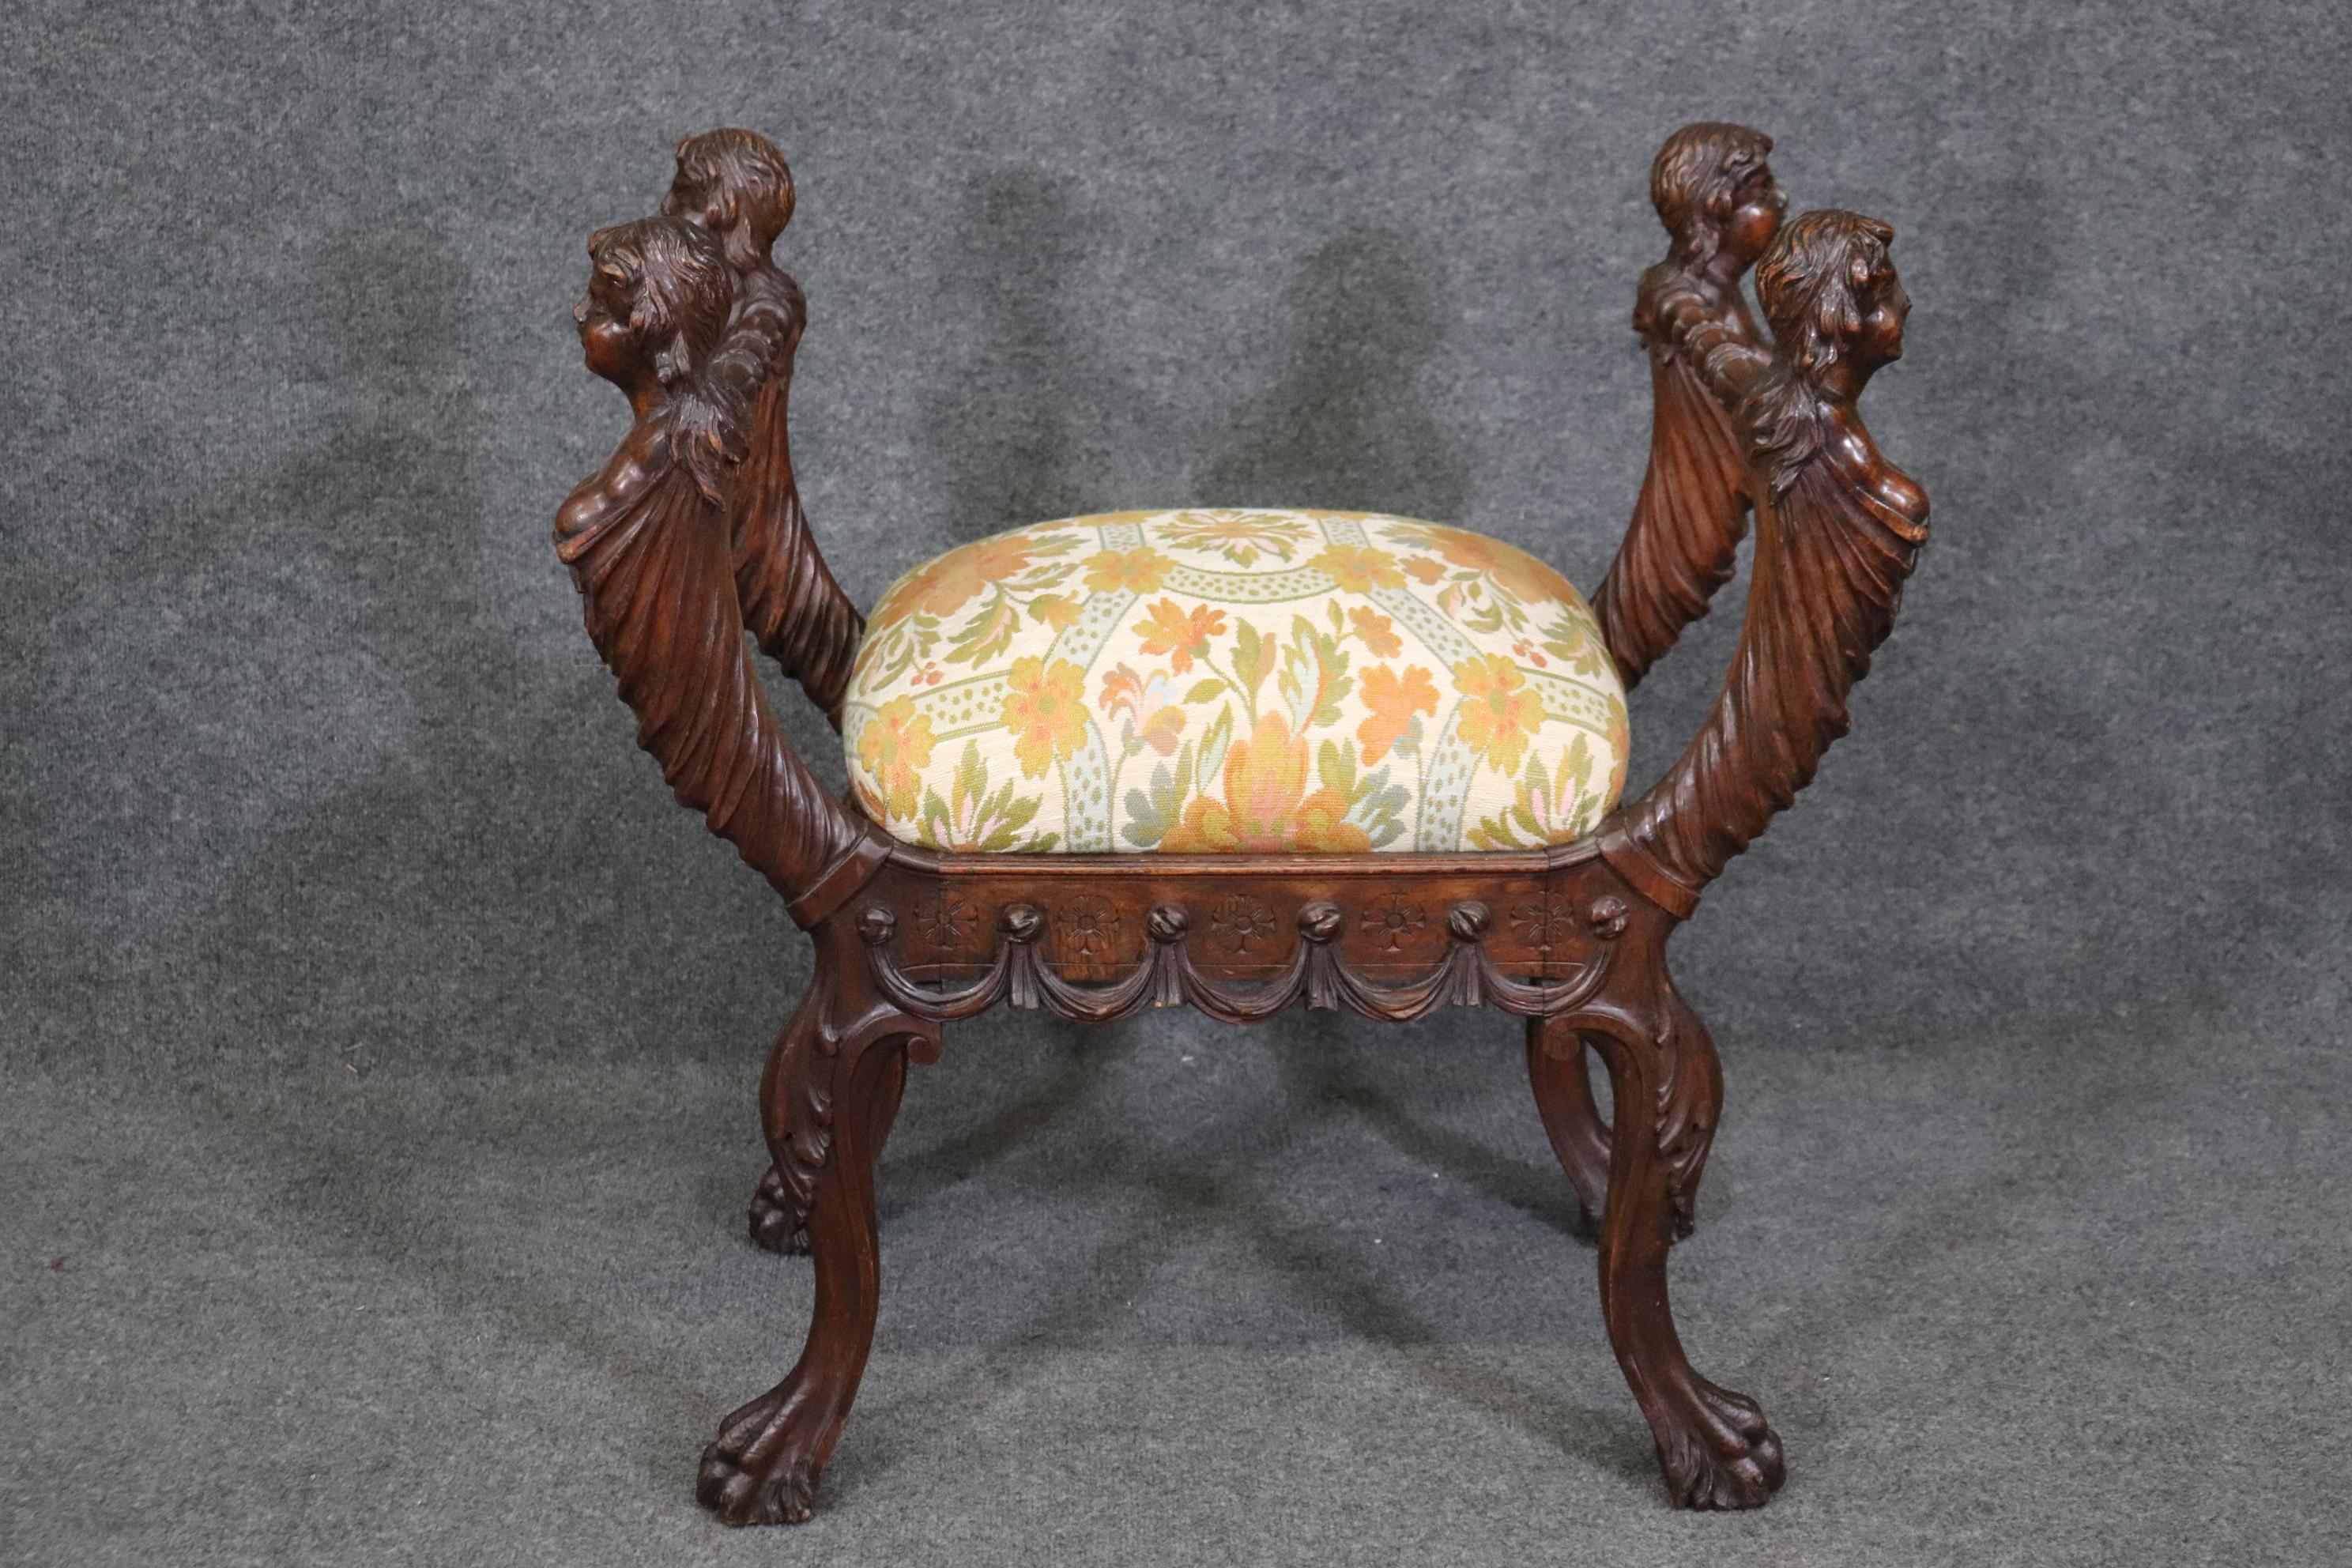 Late Victorian Rare Carved Figural Maiden Walnut Victorian Bench Stool Circa 1870 For Sale